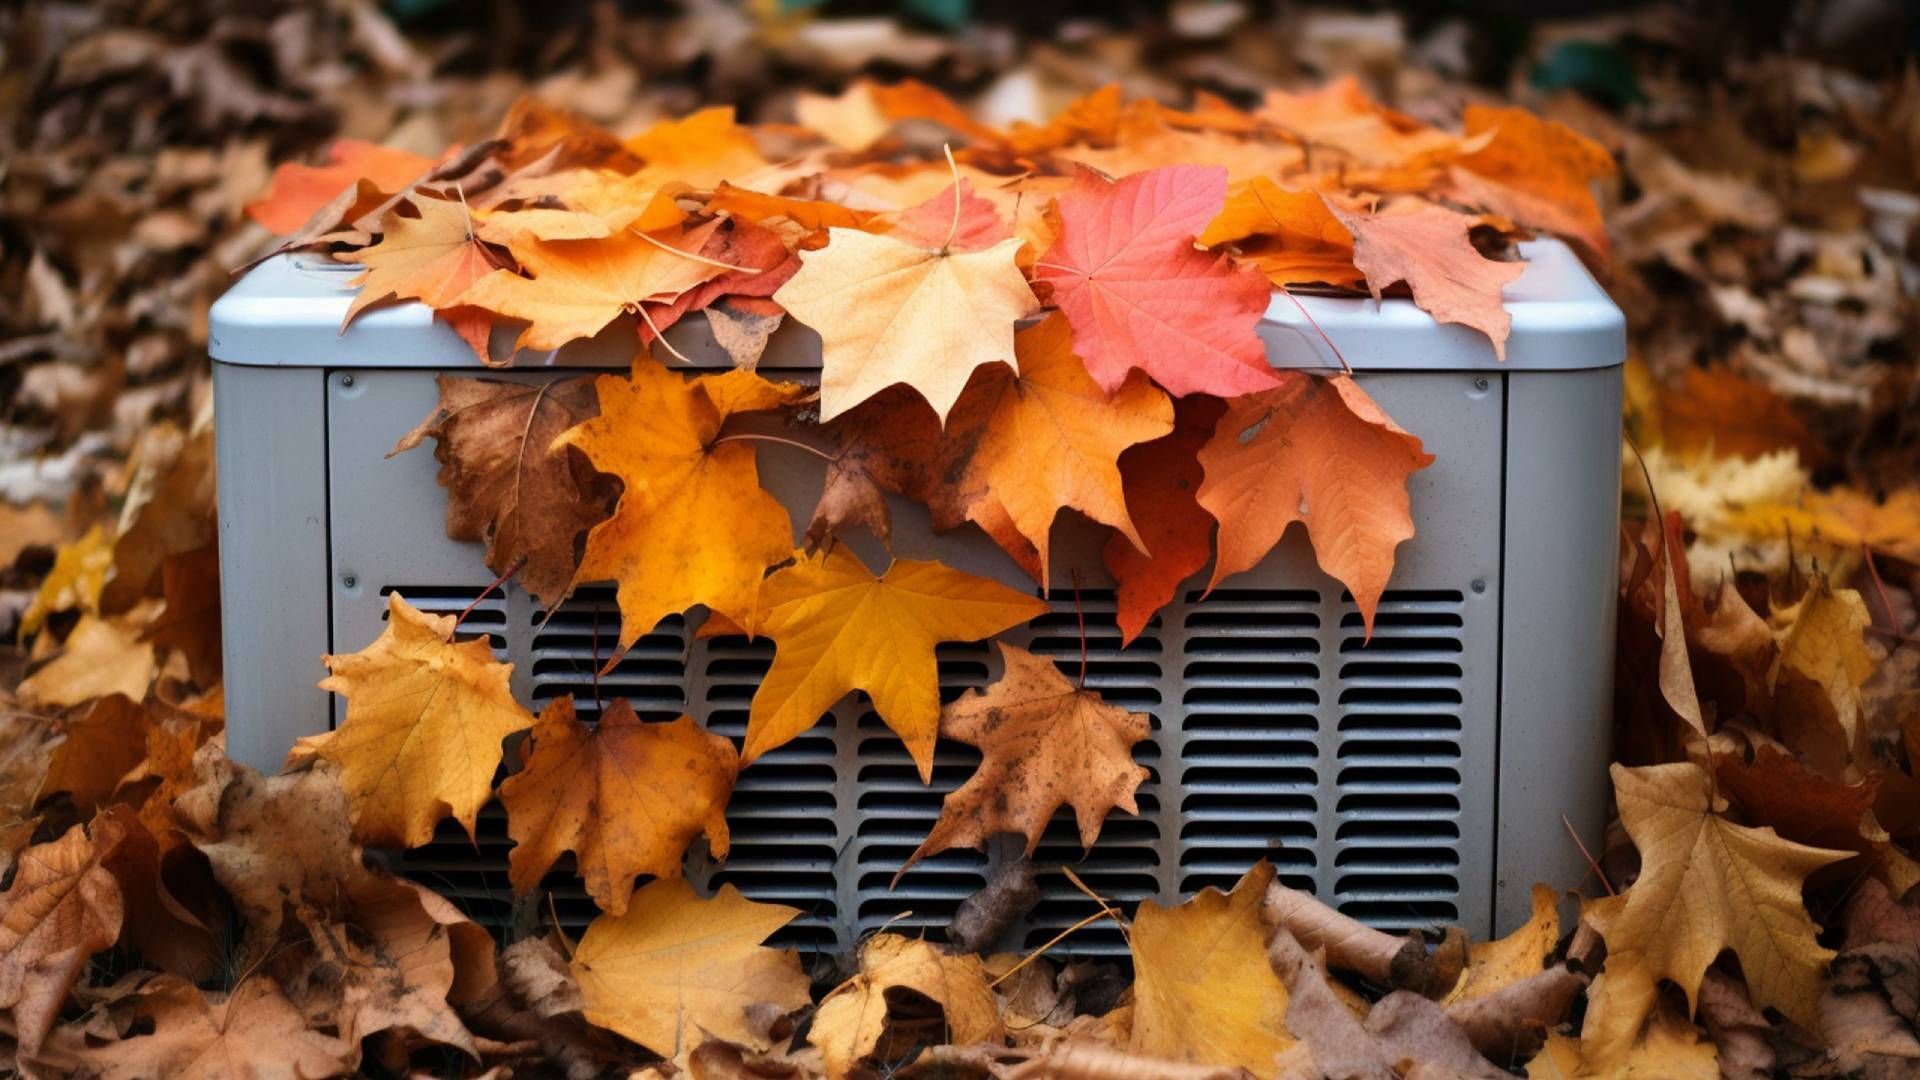 Outdoor air conditioning unit covered in fallen leaves near Somerset, KY